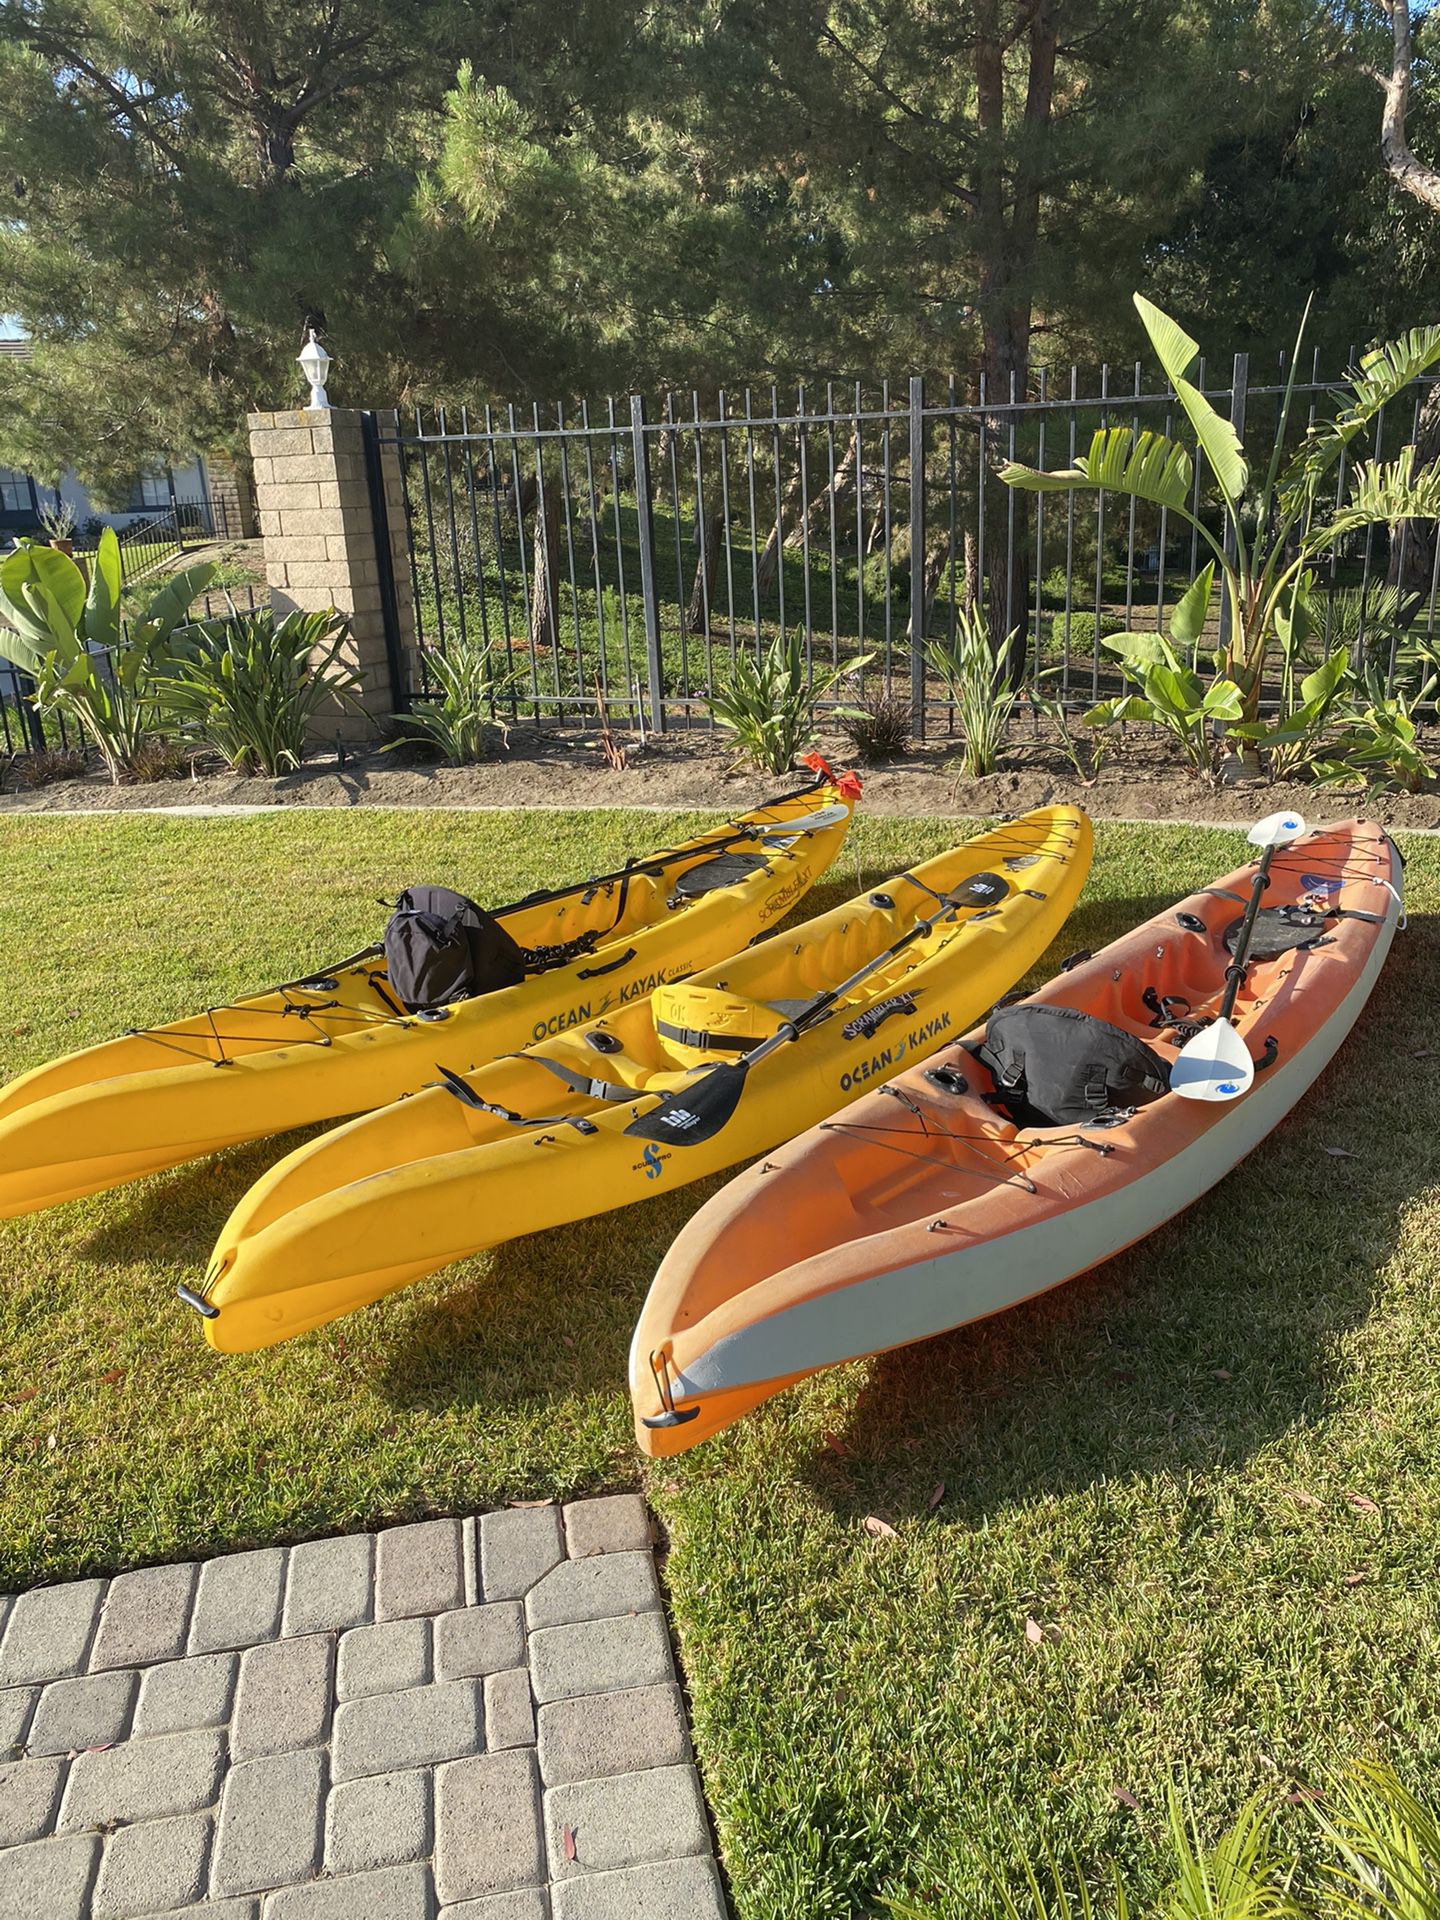 Ocean Kayak Scrambler XT. 11.6’. Stackable, rigged for fishing. Paddles, seats and rigging included. $450 each. 3 for $1,300.